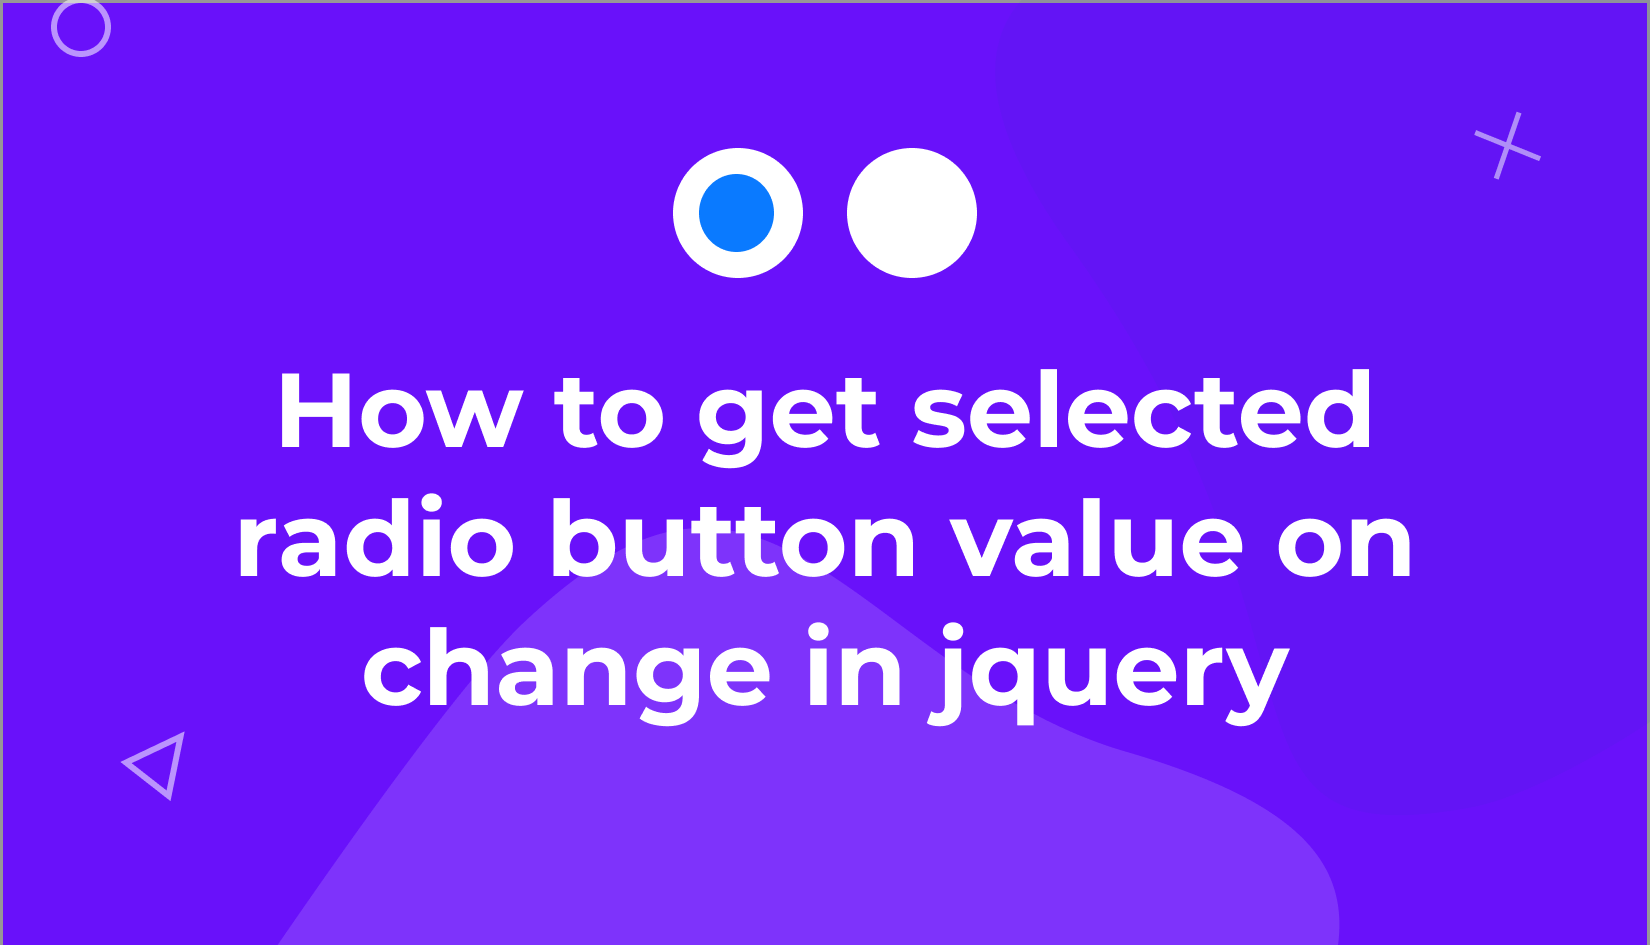 How to get selected radio button value on change in jquery